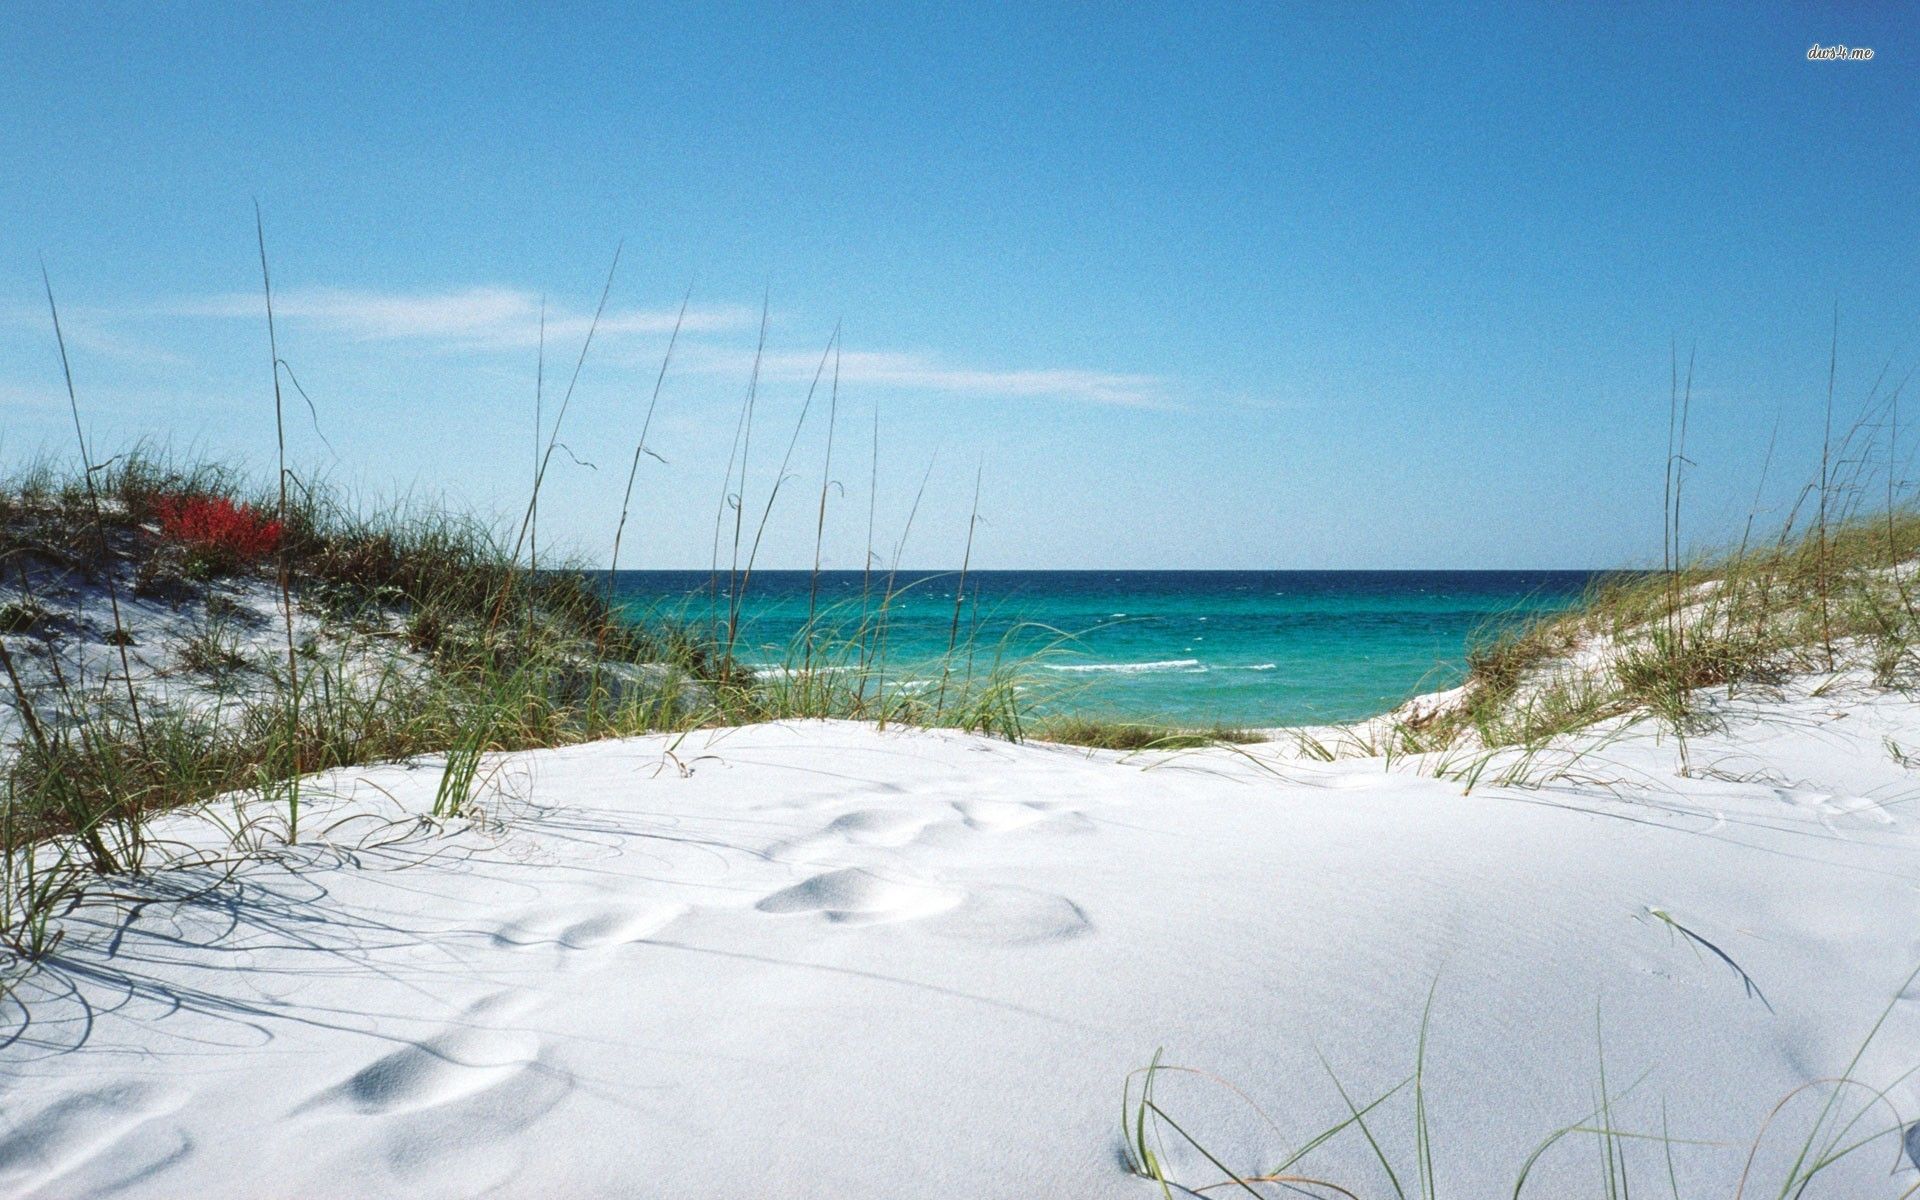 White sanded beach in Florida wallpaper - Beach wallpapers -